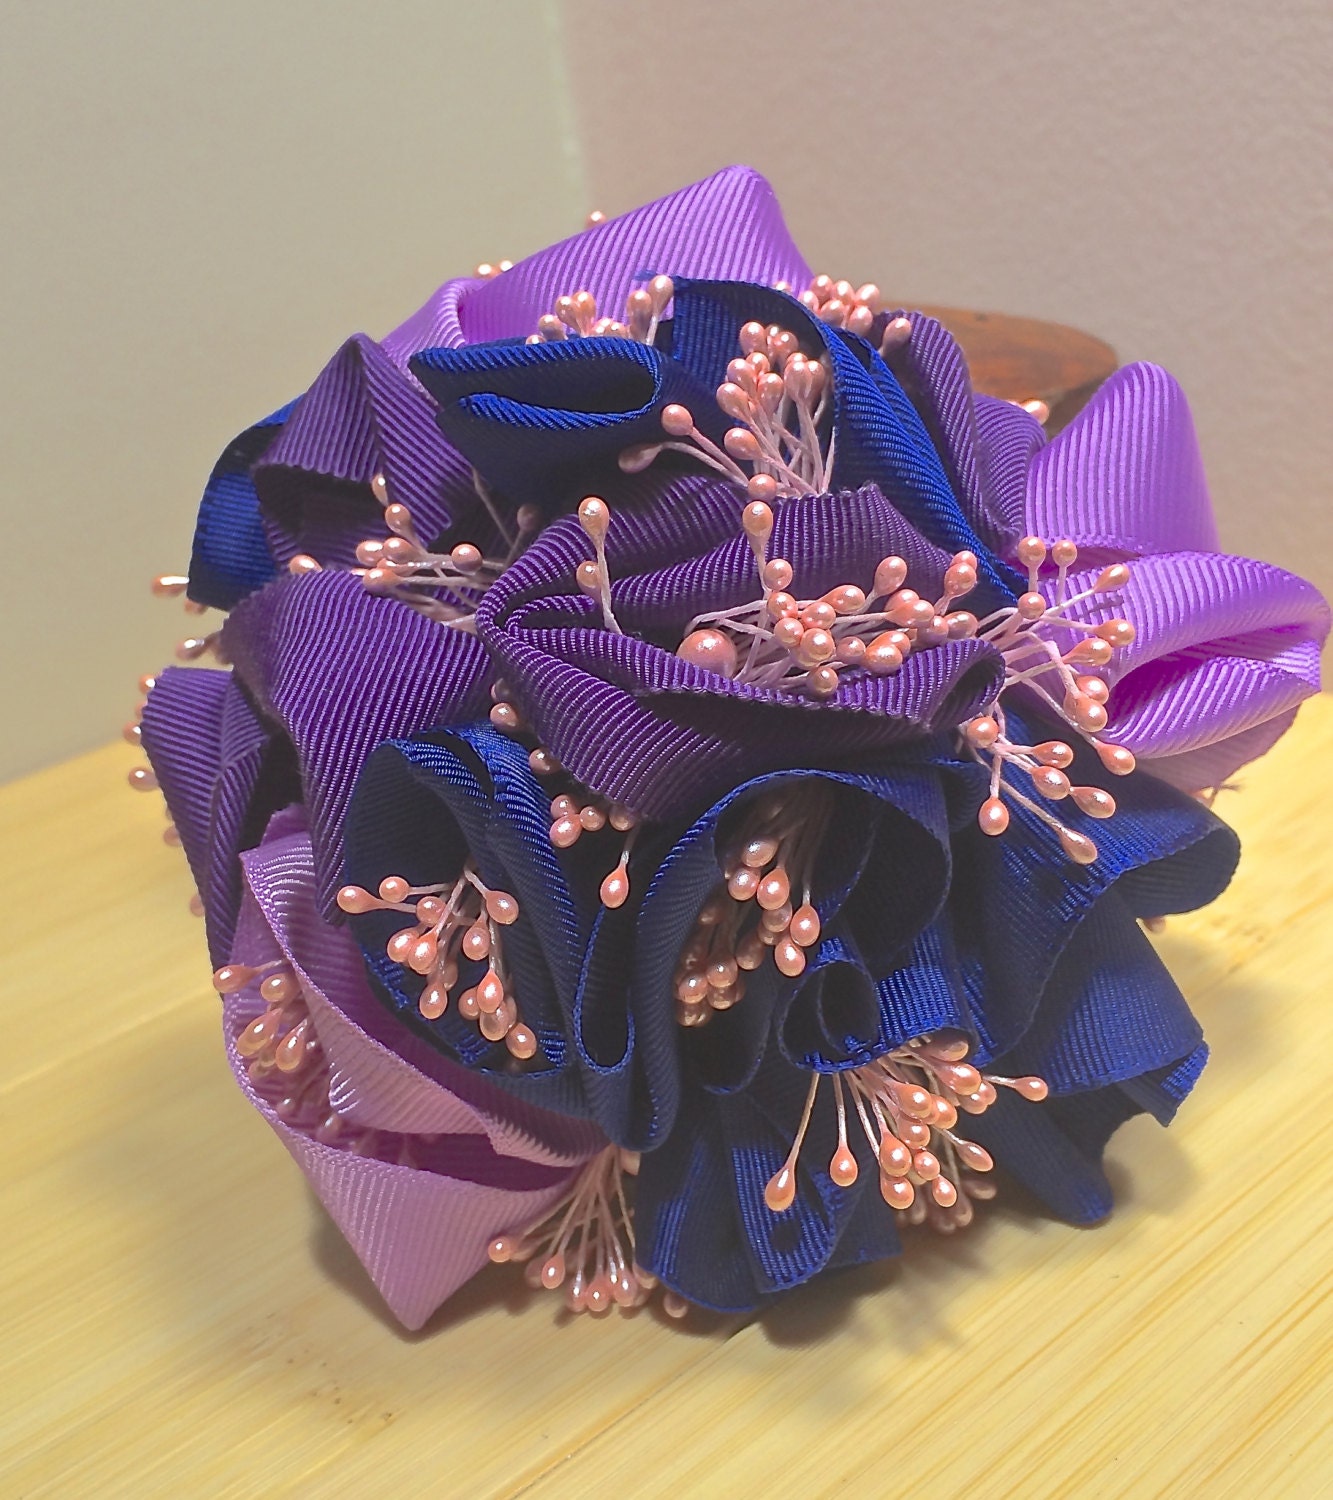 Fascinator with ribbons in purple pink and blue, brides maids hairpiece, flower girl headpiece. Custom orders in your colors available!